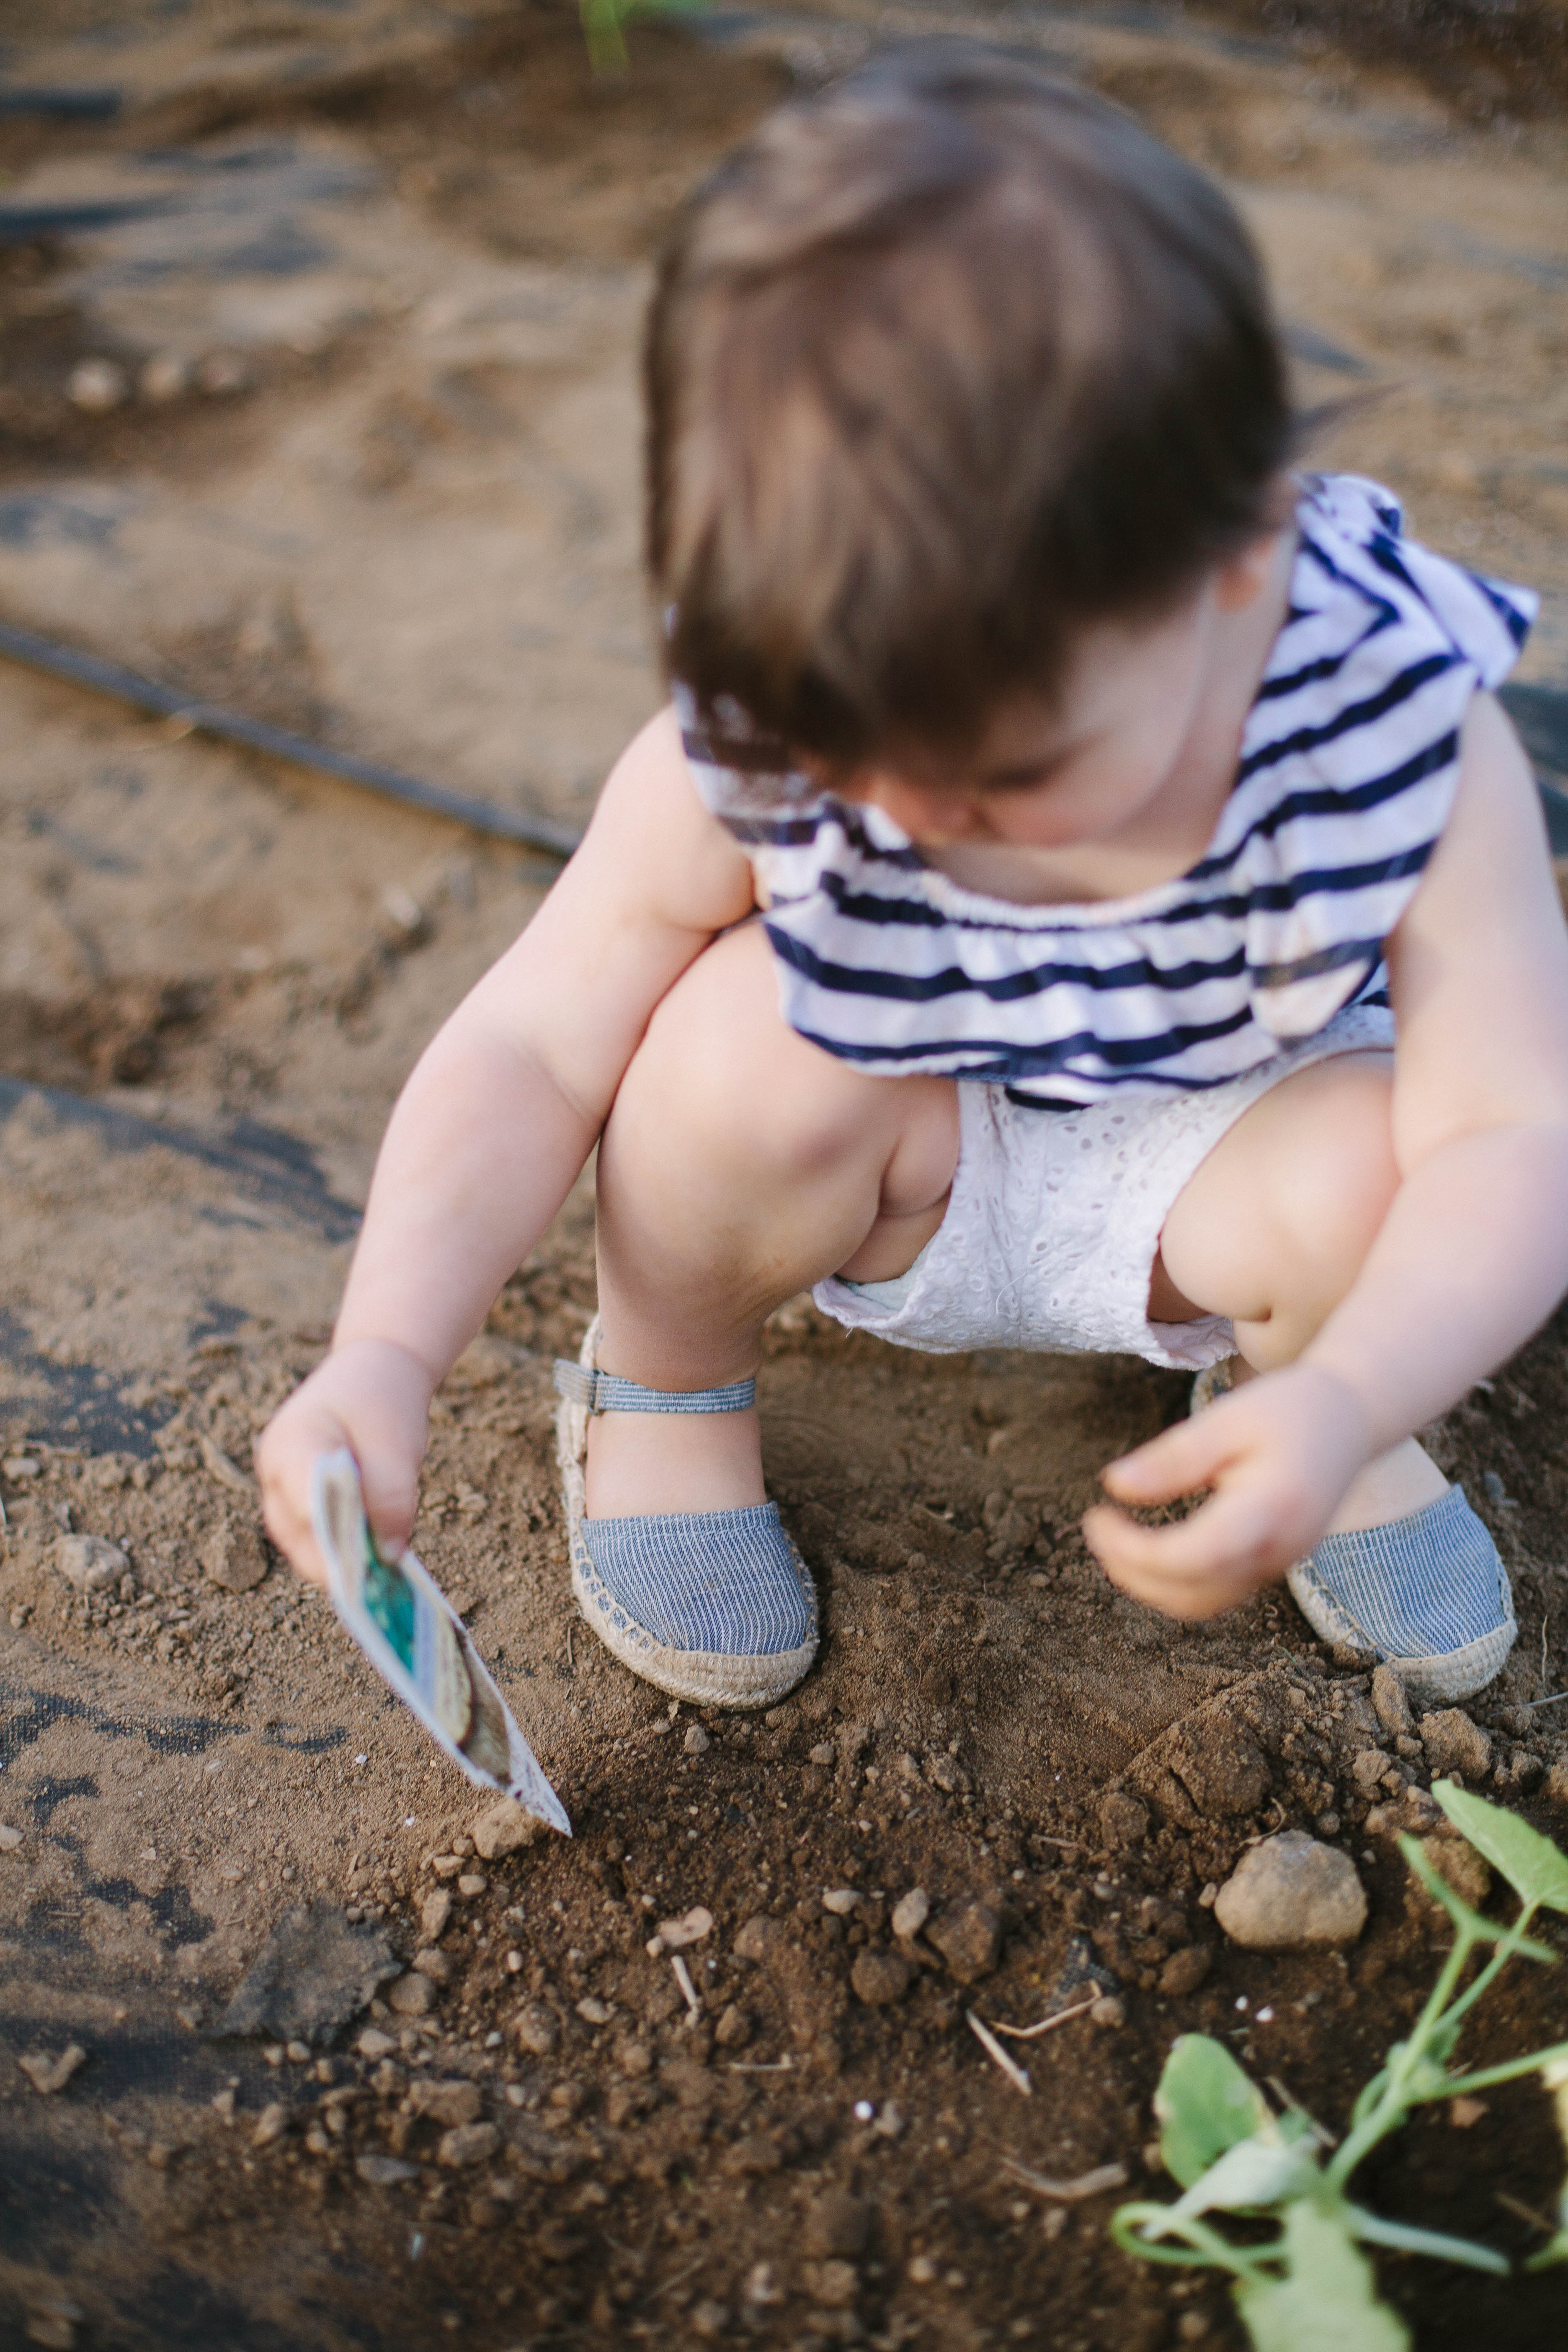 Planning on starting a garden? These tips on Gardening For Kids give ways to get the little ones involved!